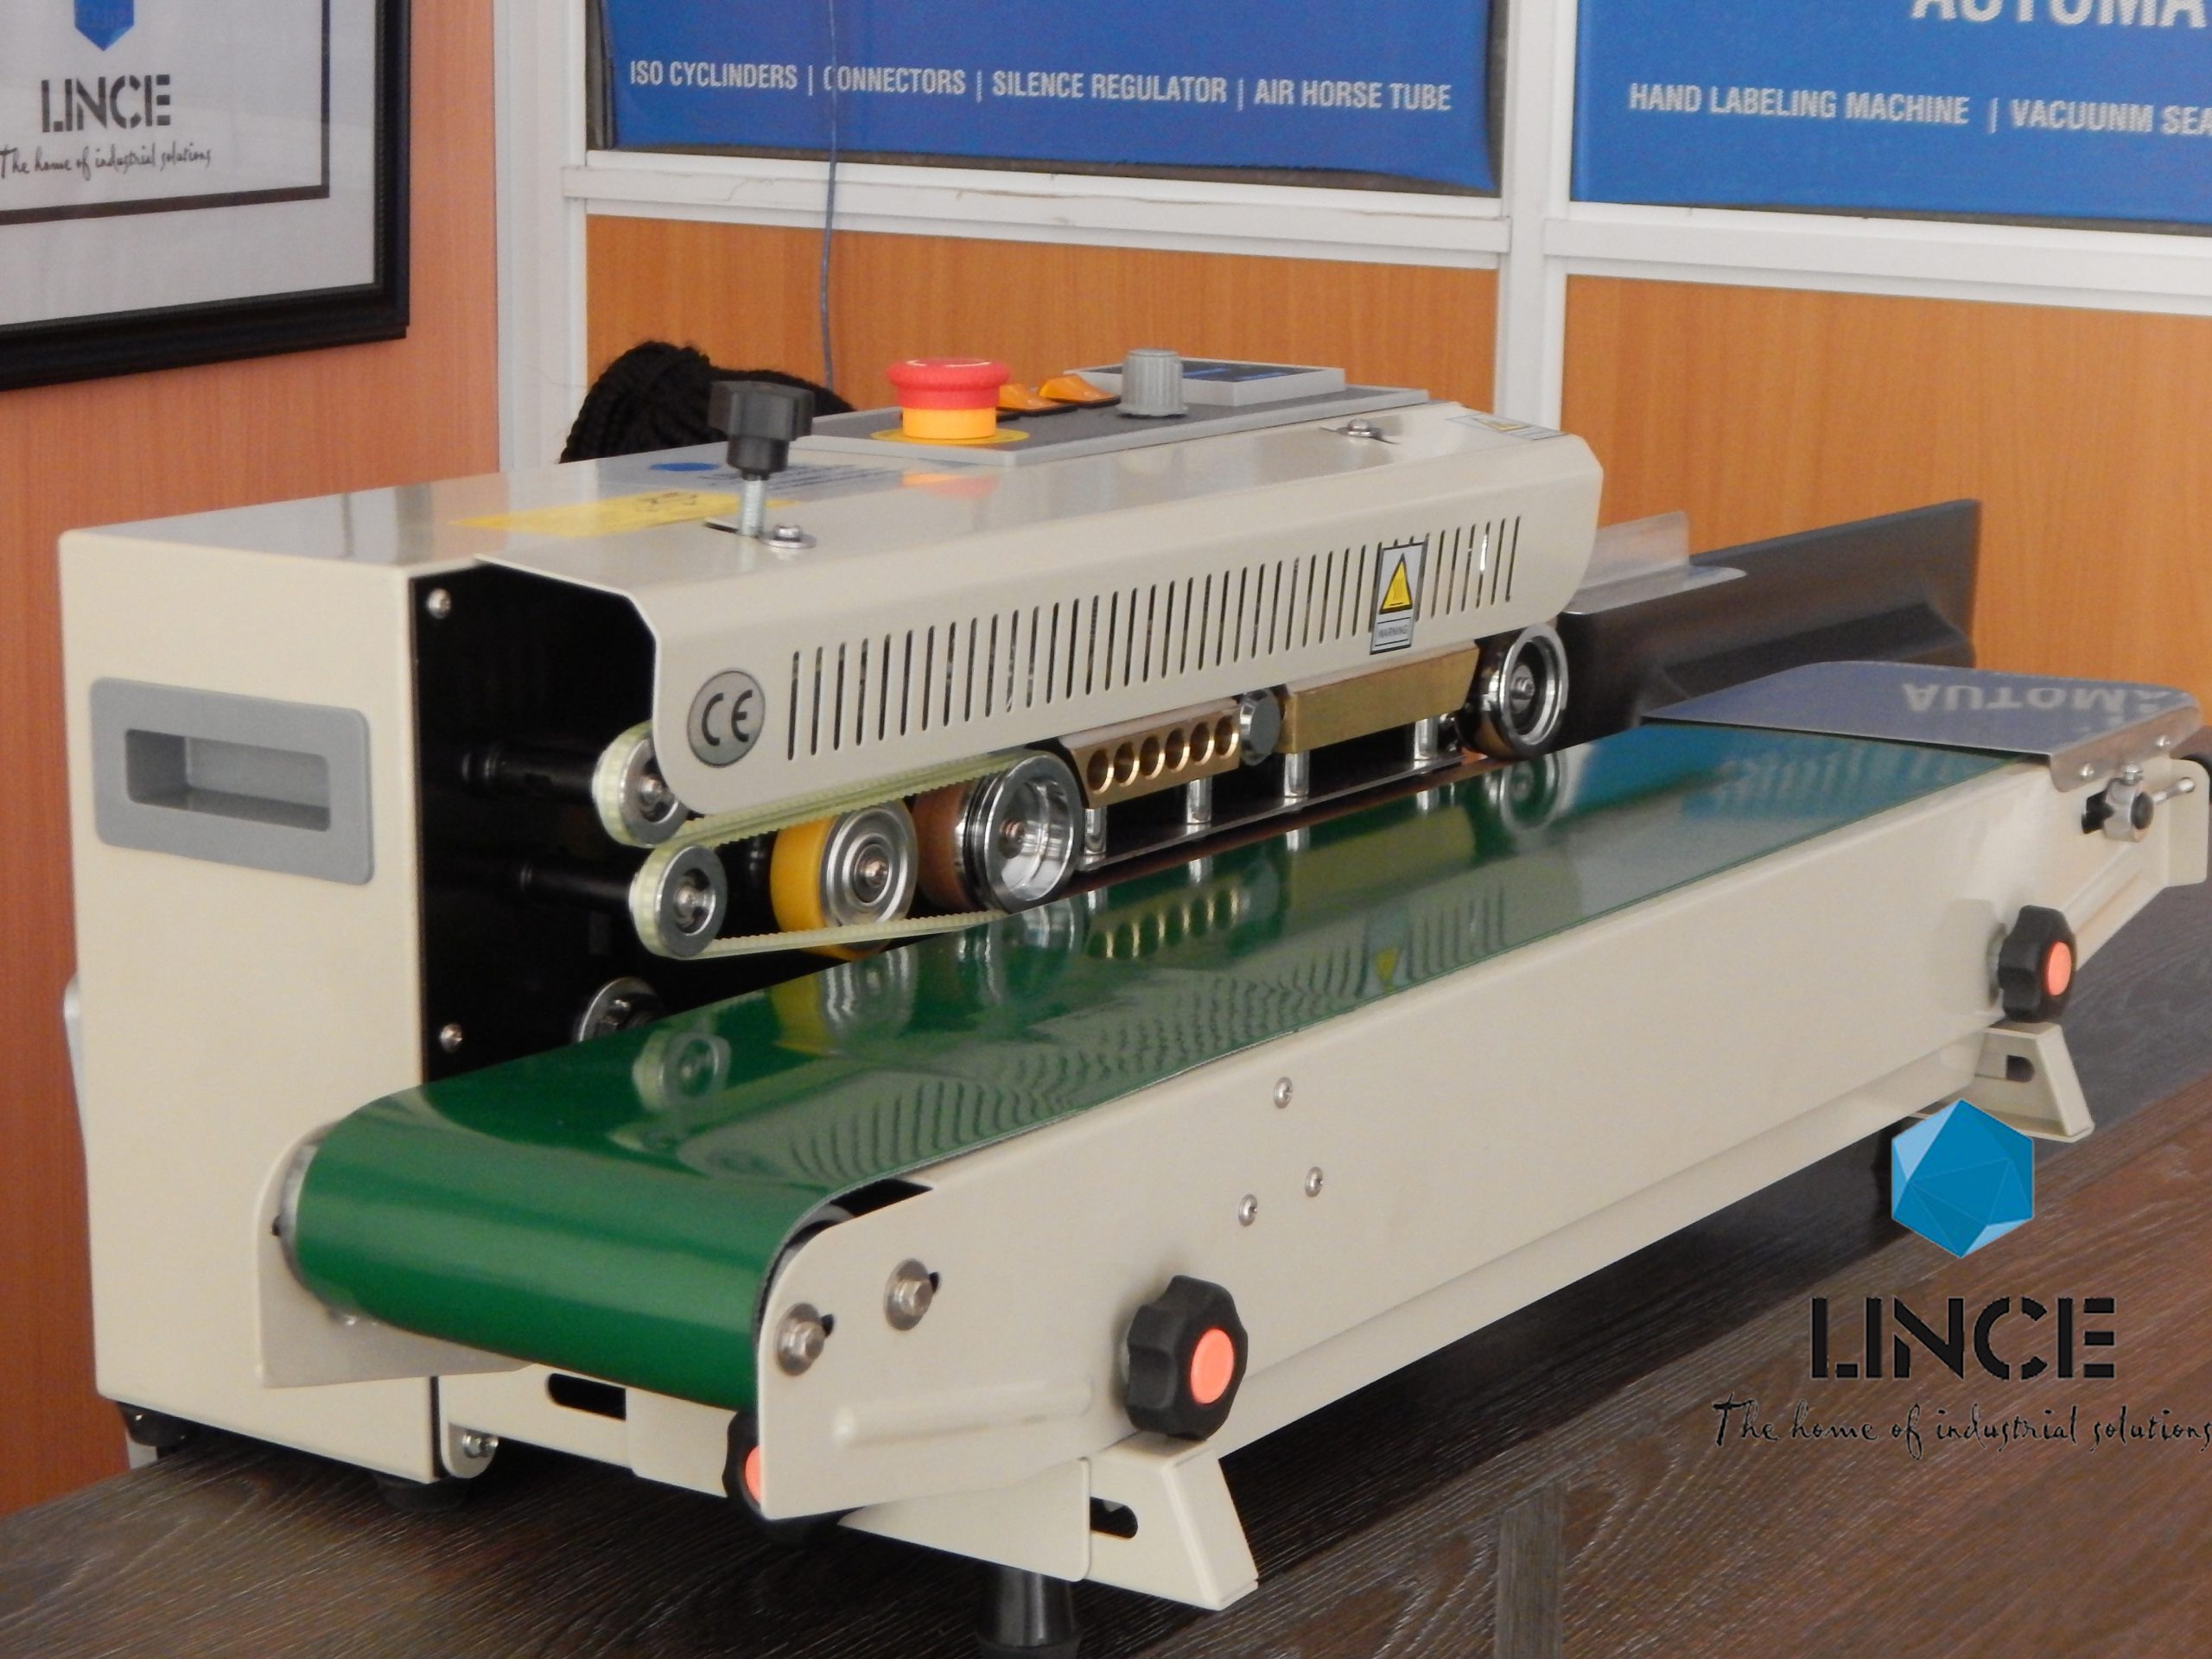 Automatic continuous plastic bag sealing machine with Coding